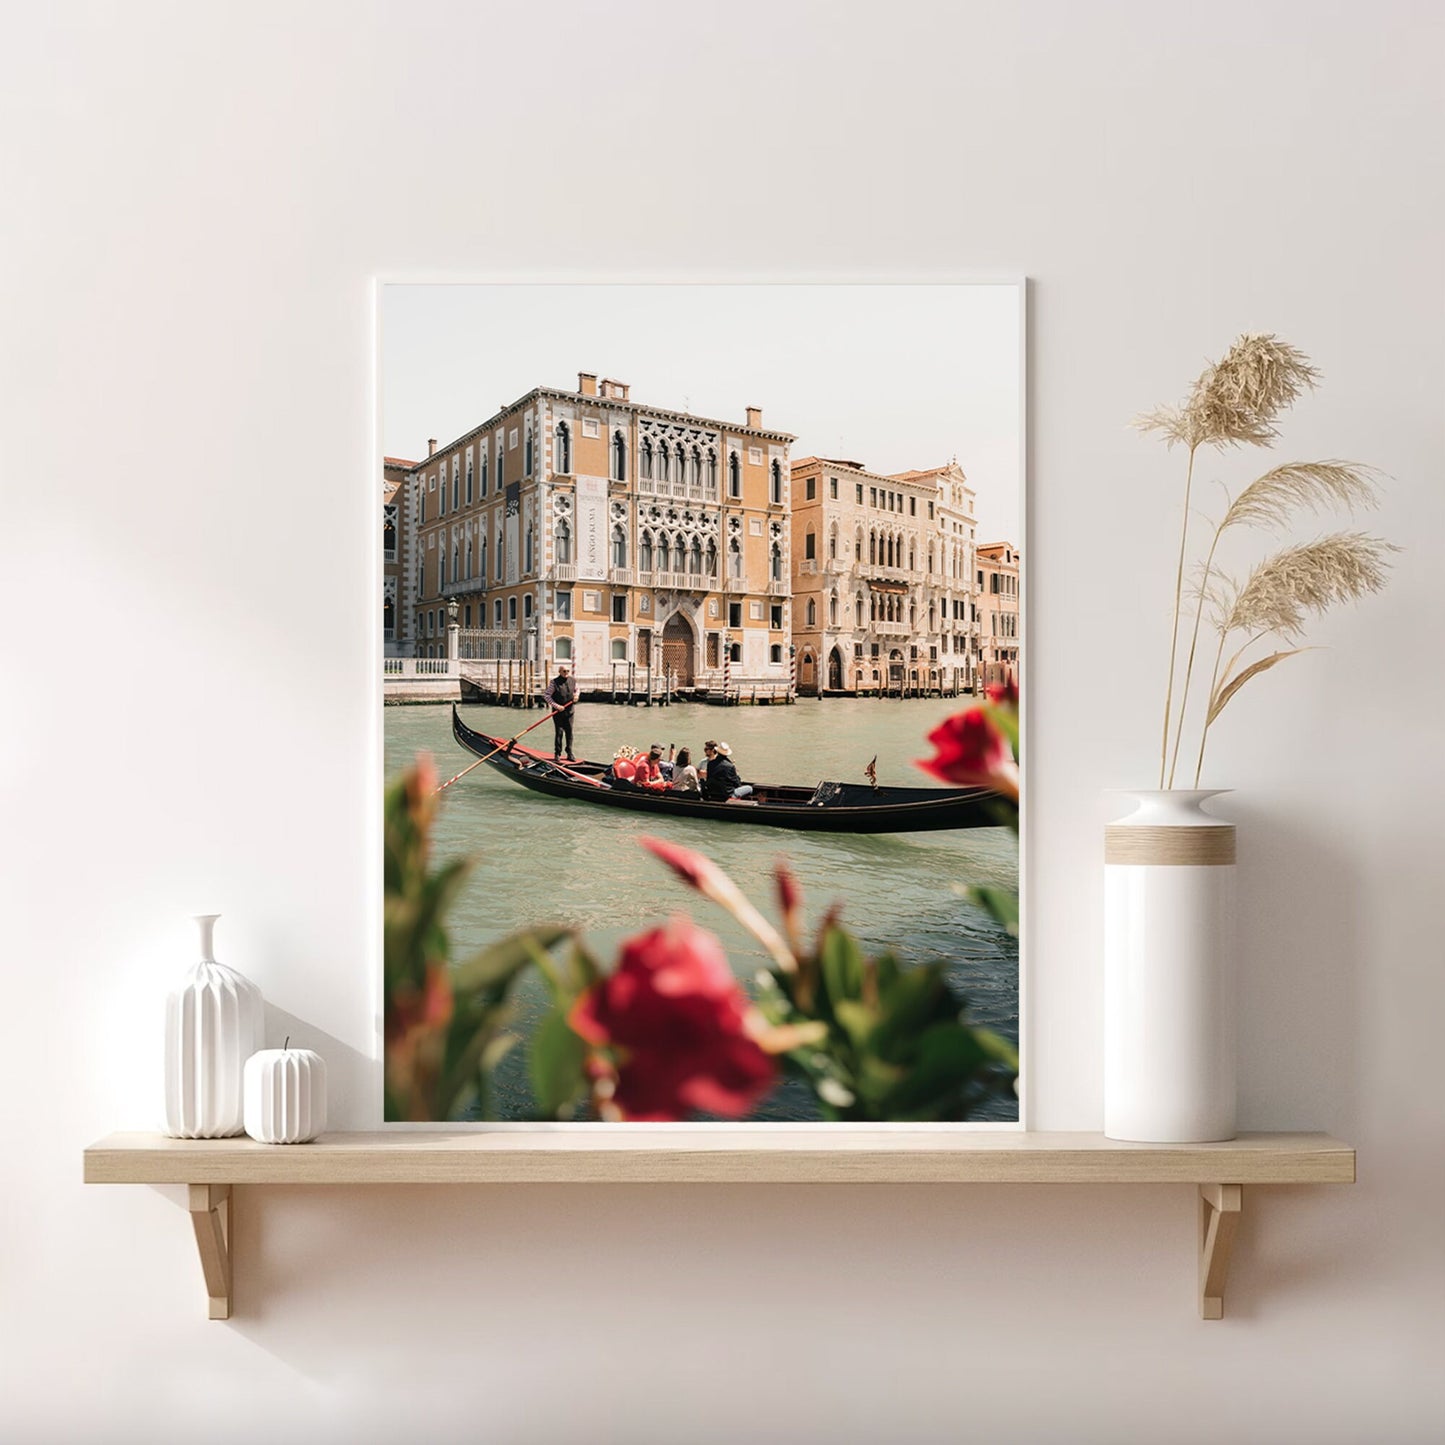 Venice Italy Floral Gondola Print, Gondola in Grand Canal, Italian Wall Art, Spring in Italy Lifestyle Photography, Red Italy Flowers